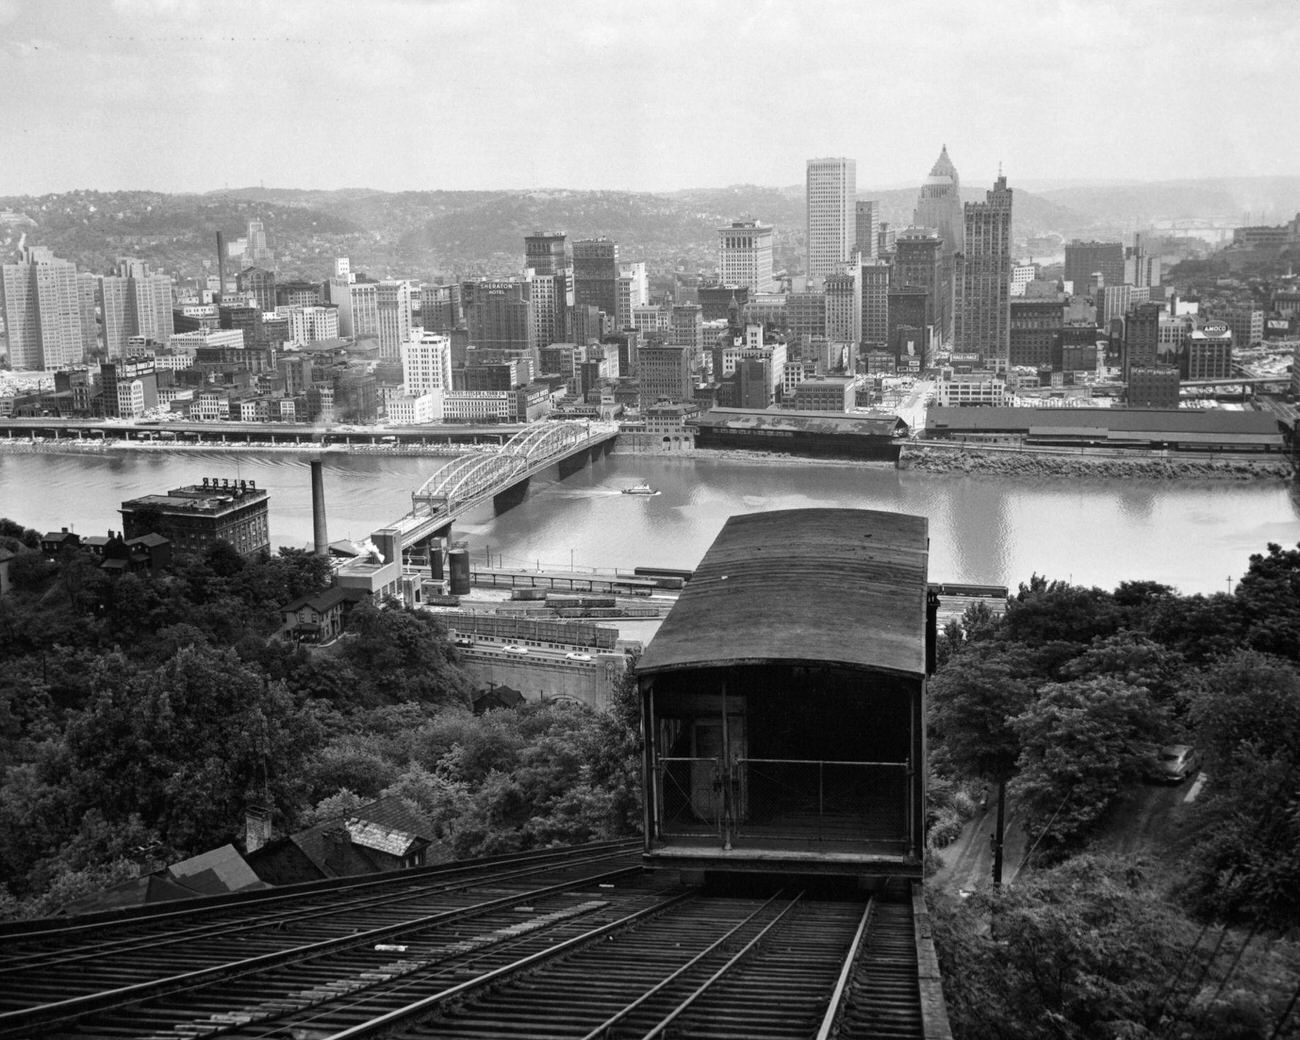 Downtown Pittsburgh View from Across the River, 1955